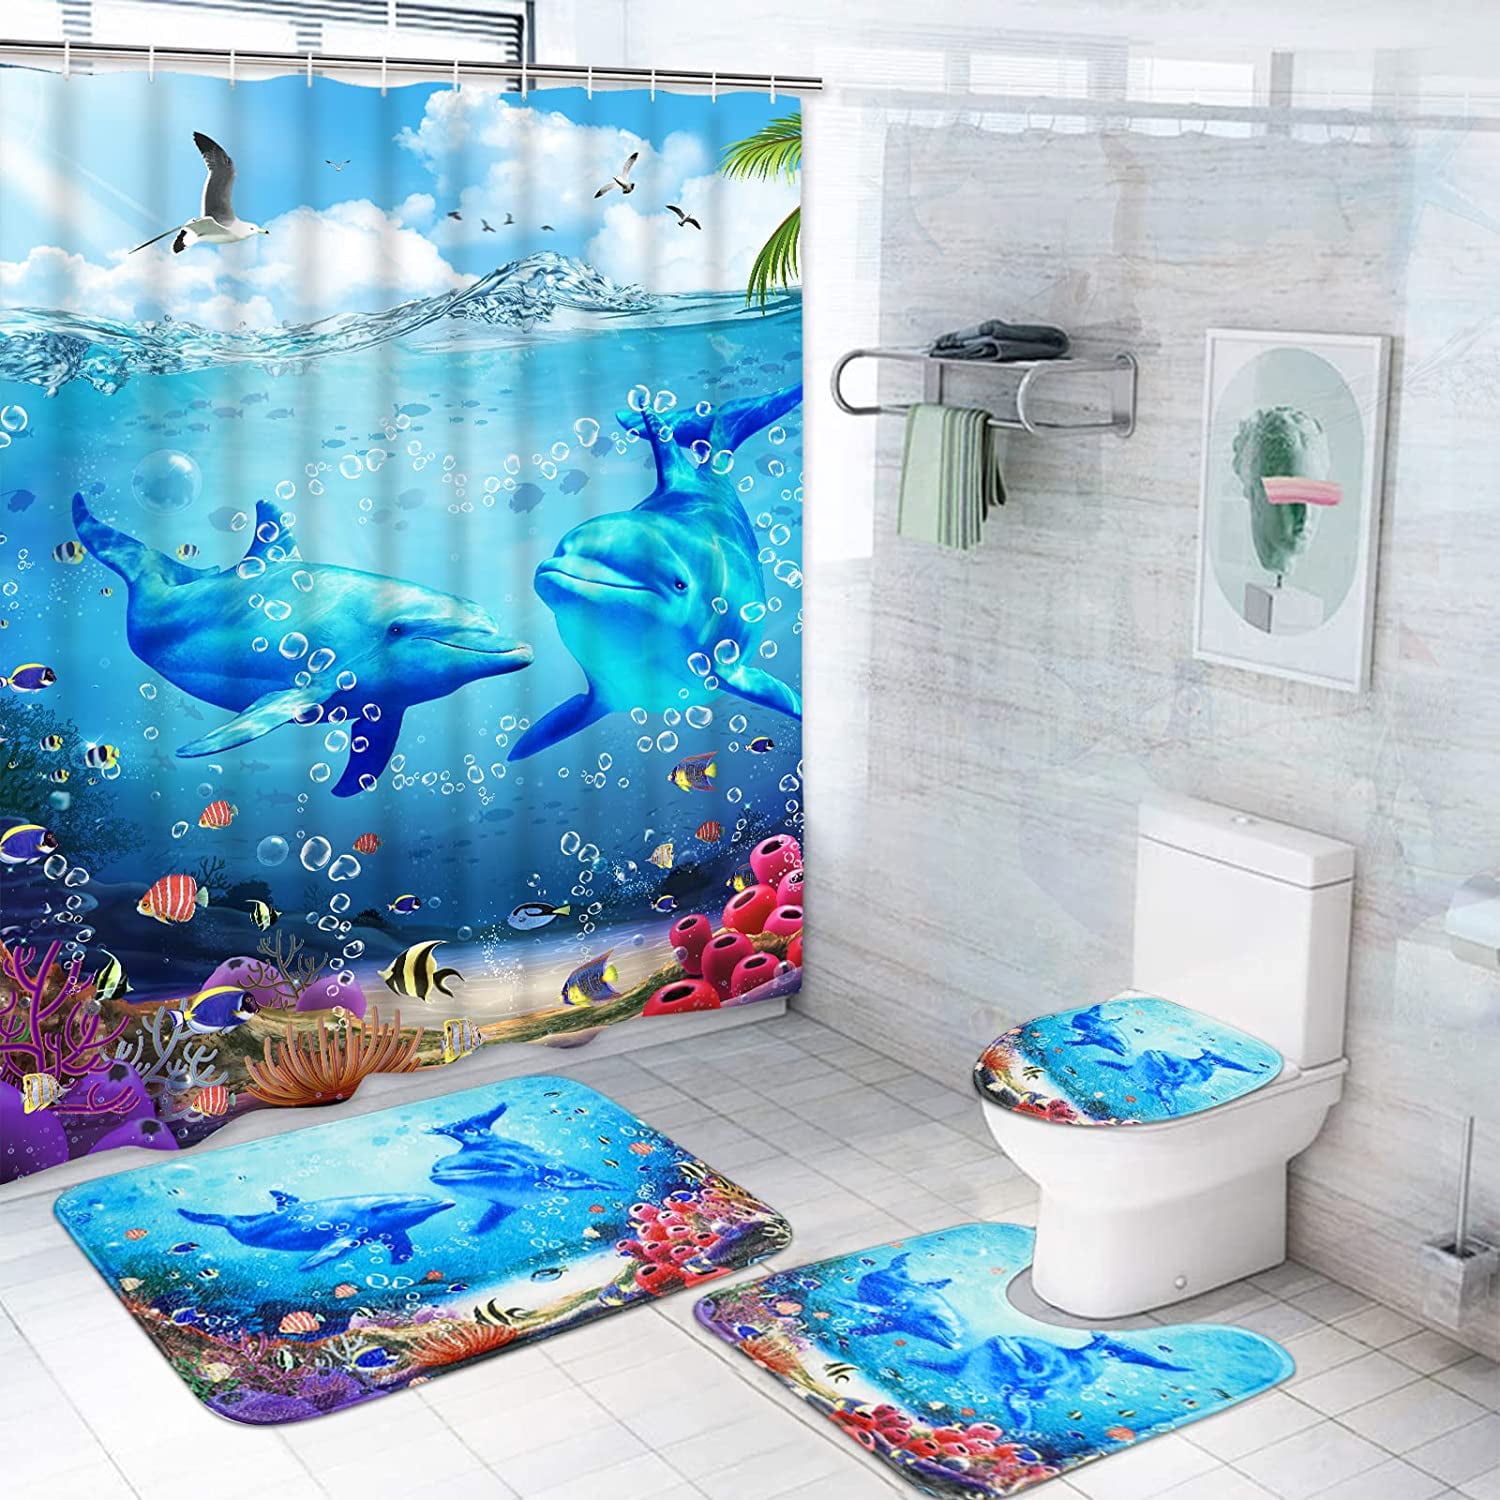 ARTJIA Ocean World Decor Colorful Graphics Fish in the Seawater Polyester  Fabric Bathroom Shower Curtain 66x72 inches 